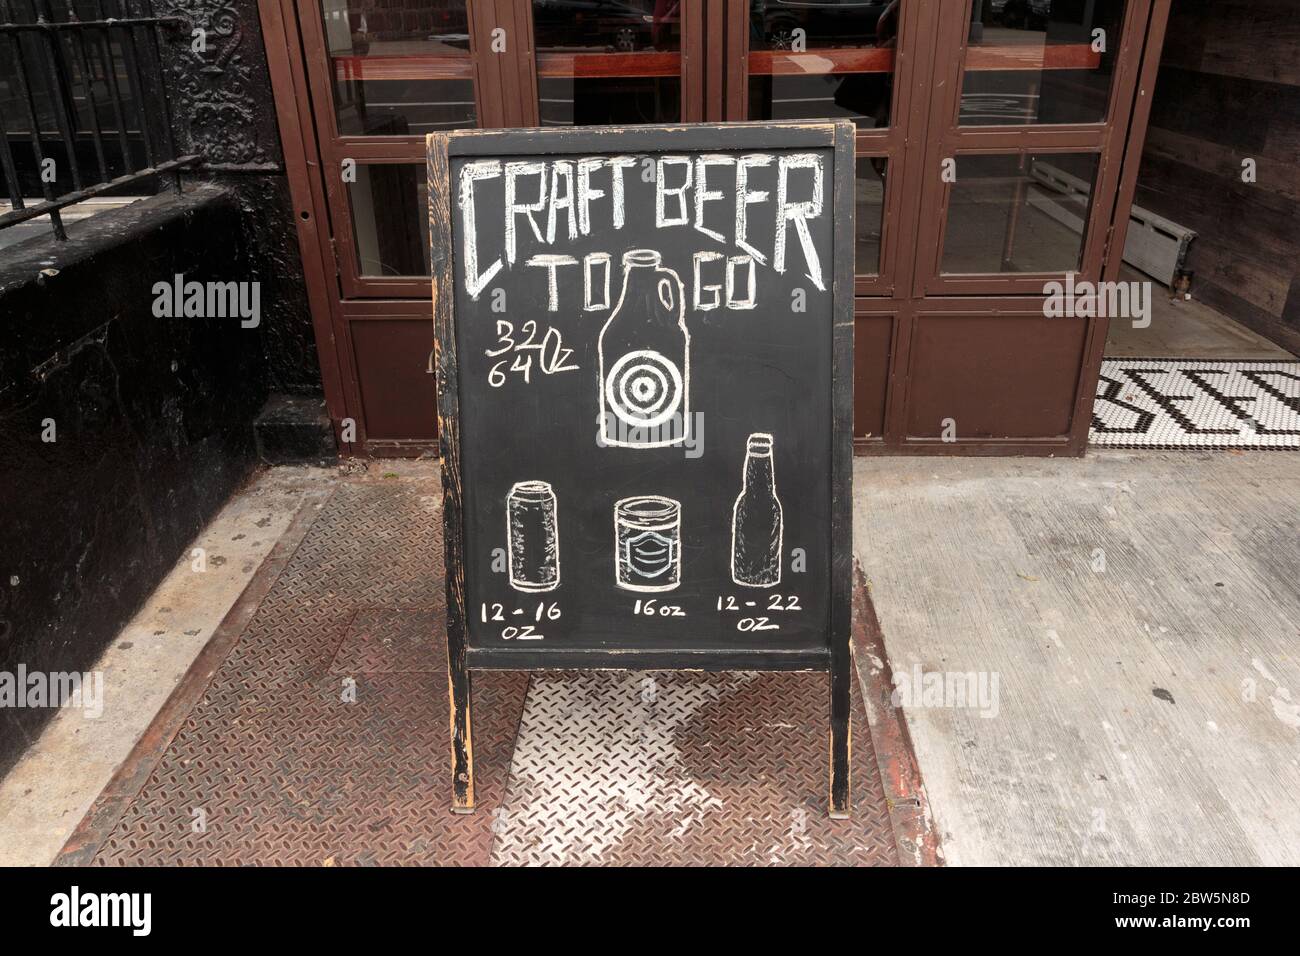 a sidewalk chalkboard or blackboard sign in Harlem advertising craft beer to go during the coronavirus or covid-19 pandemic Stock Photo